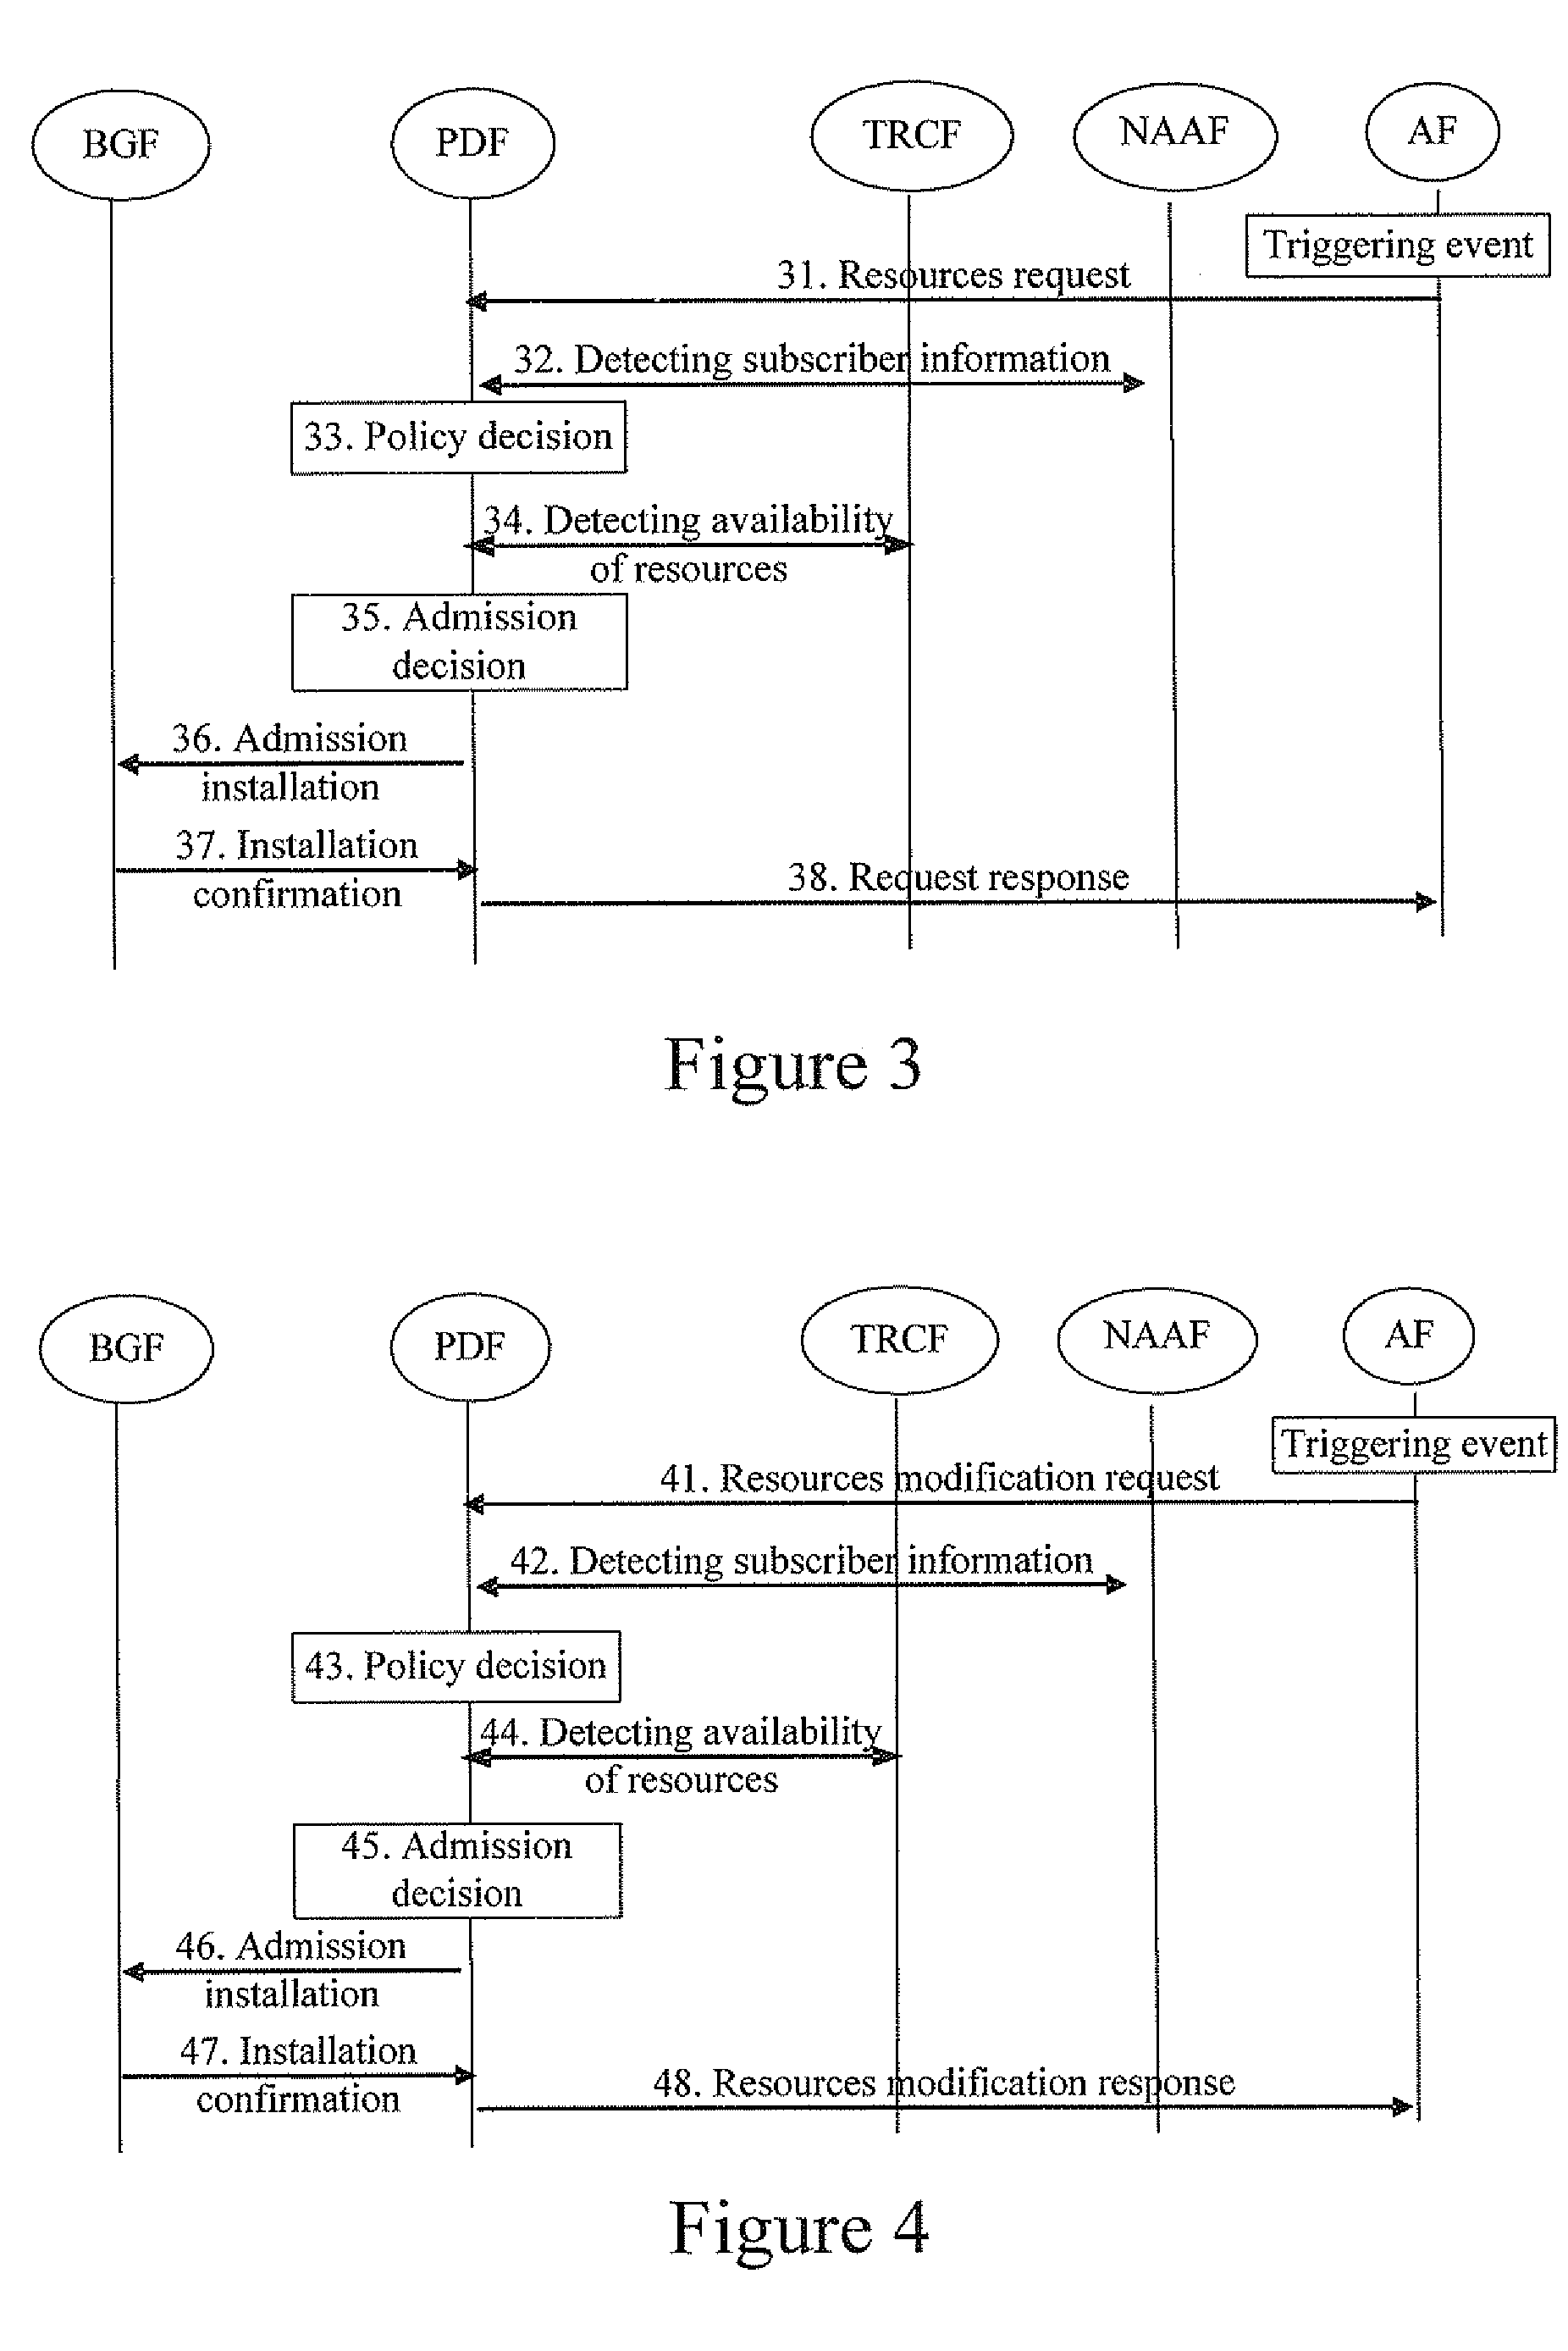 Method for Implementing Resources Reservation in a Proxy-Requested Mode in Next Generation Network